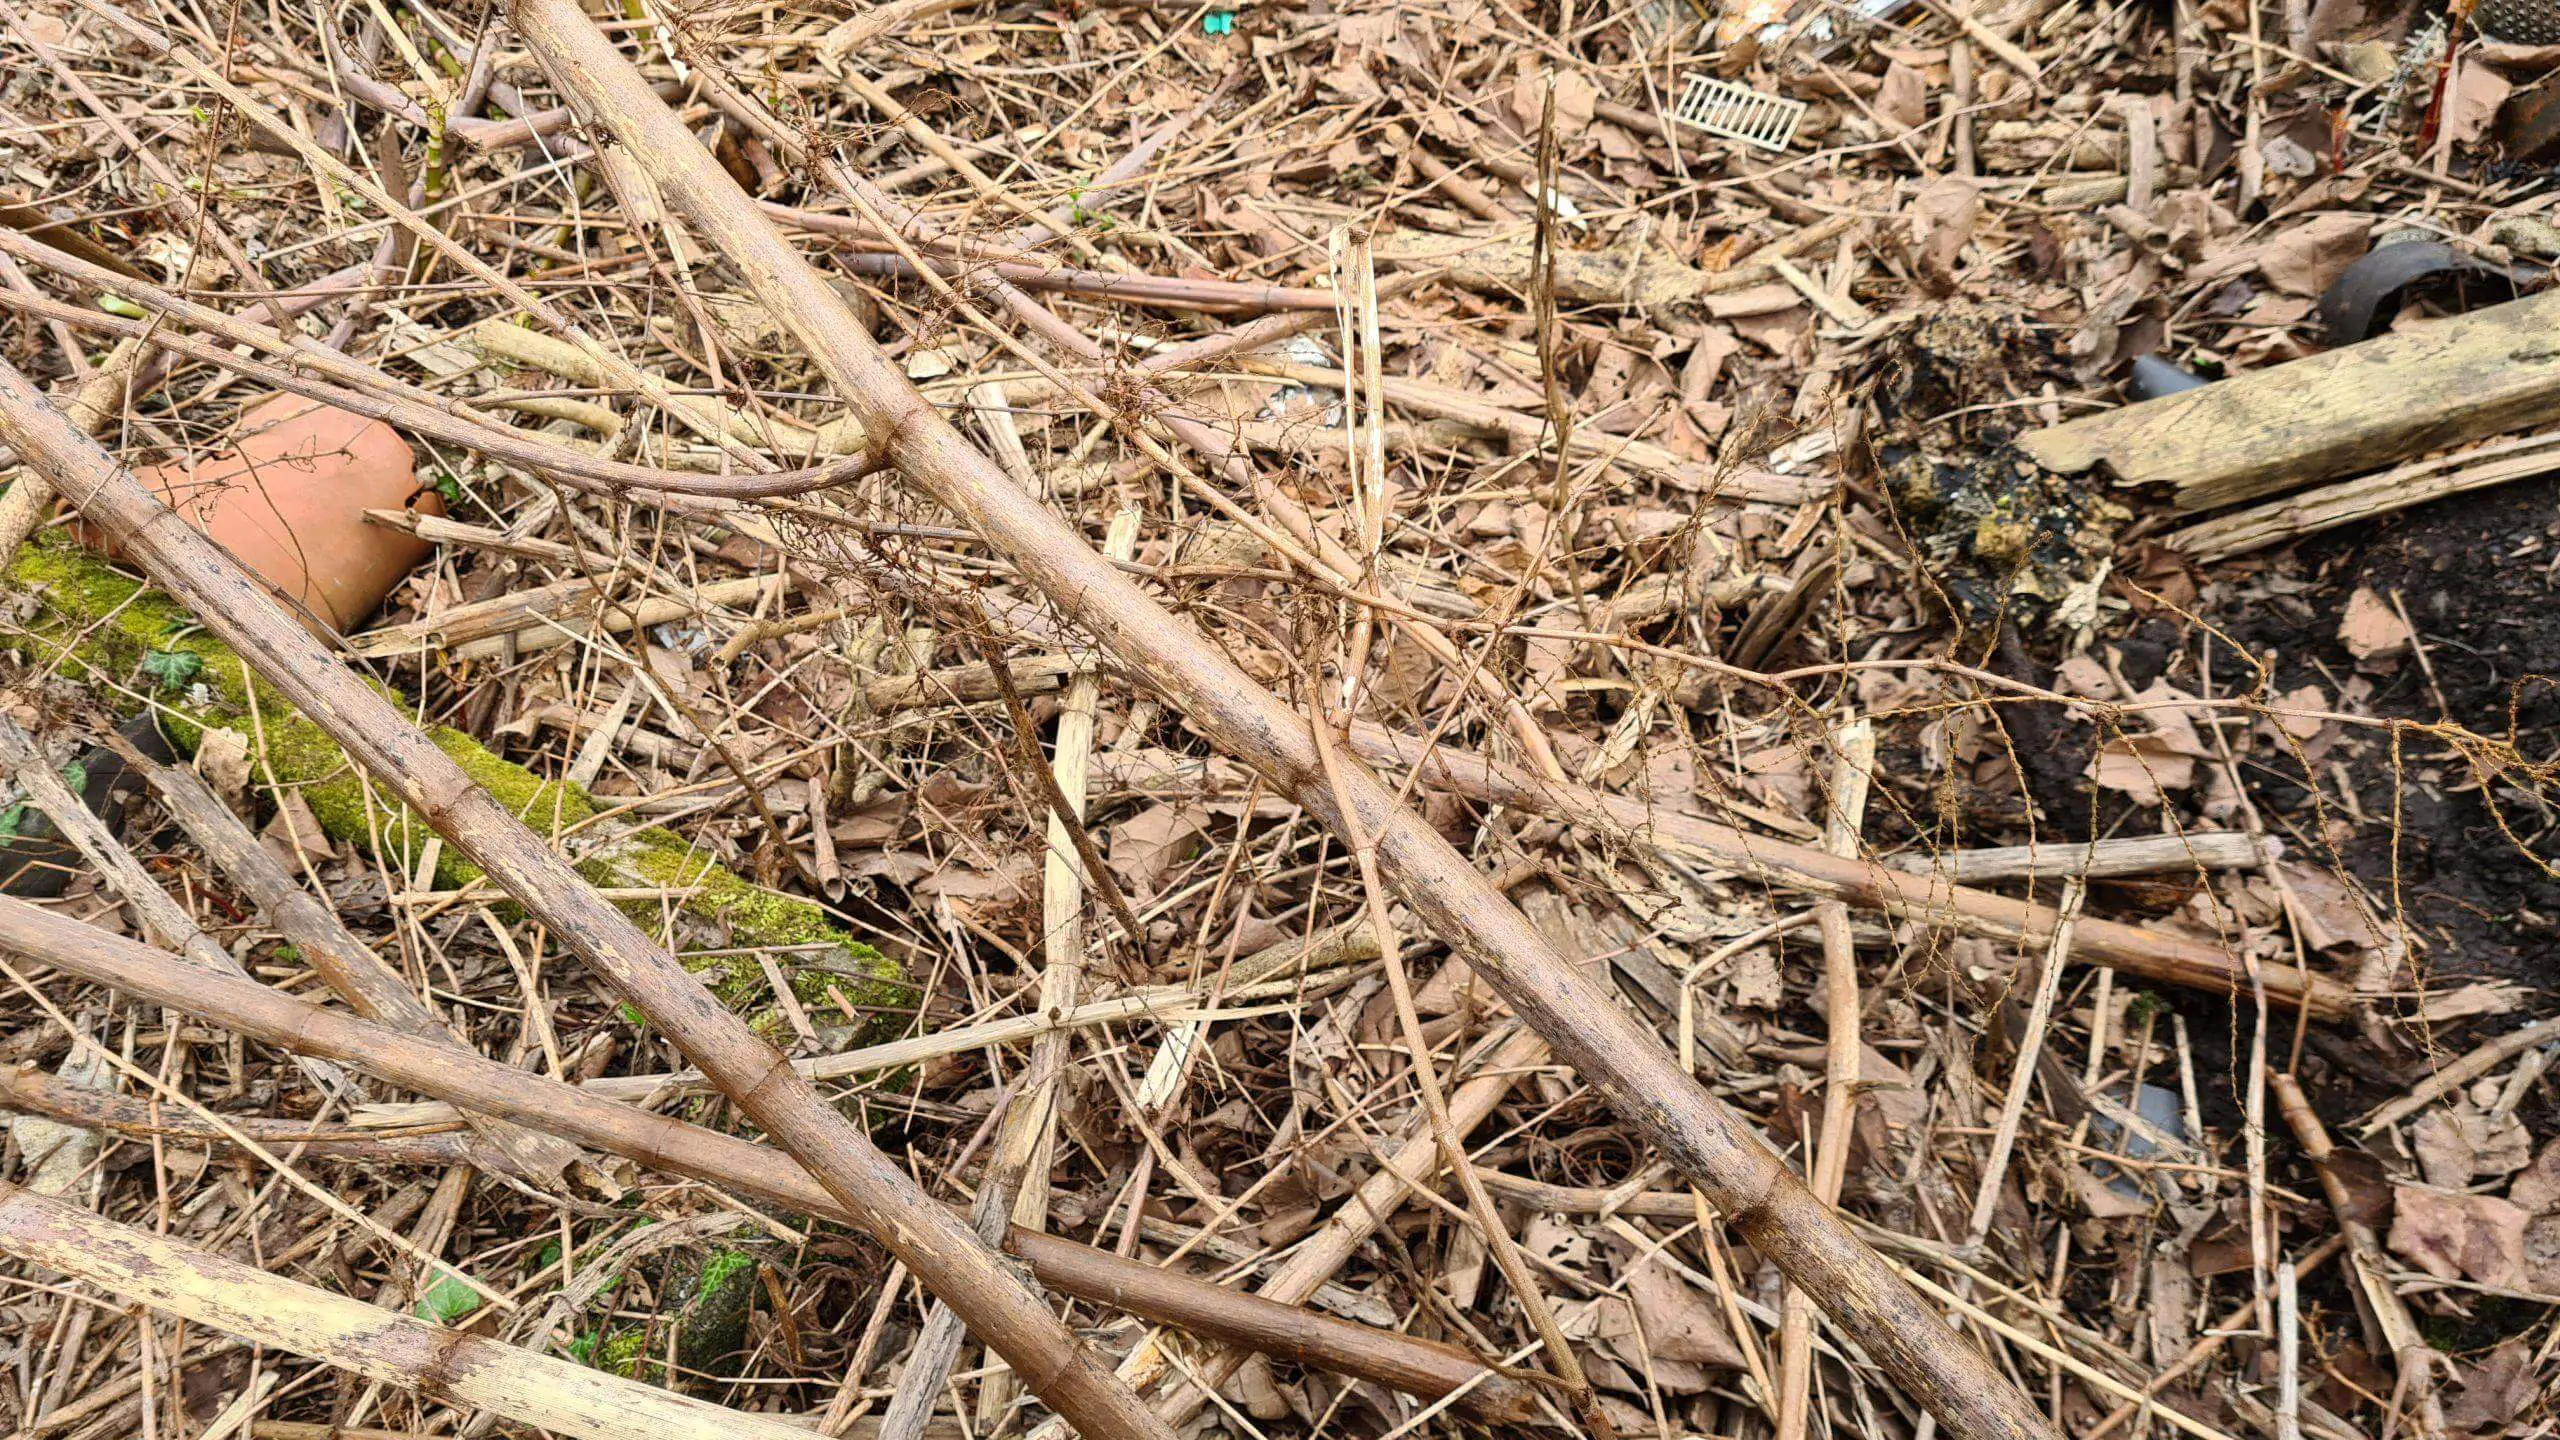 Use of a machete and brushcutter to cut down Japanese knotweed manually